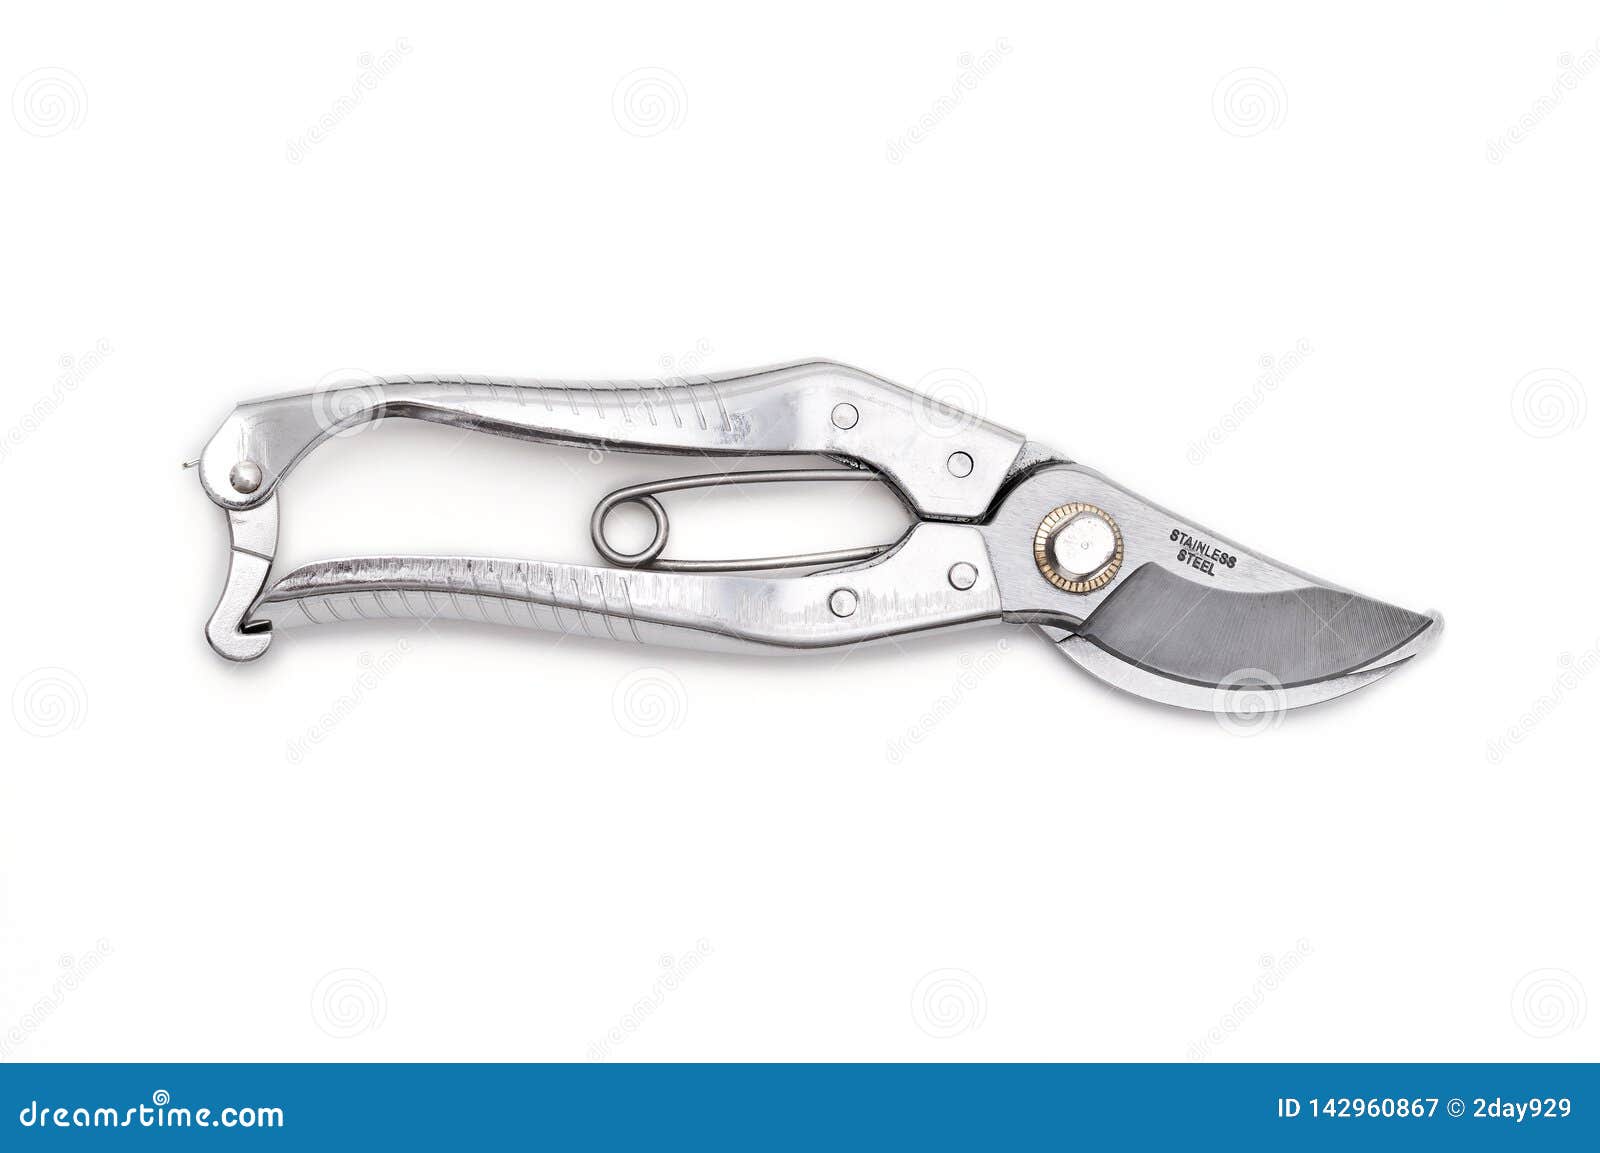 stainless steel pruning shear